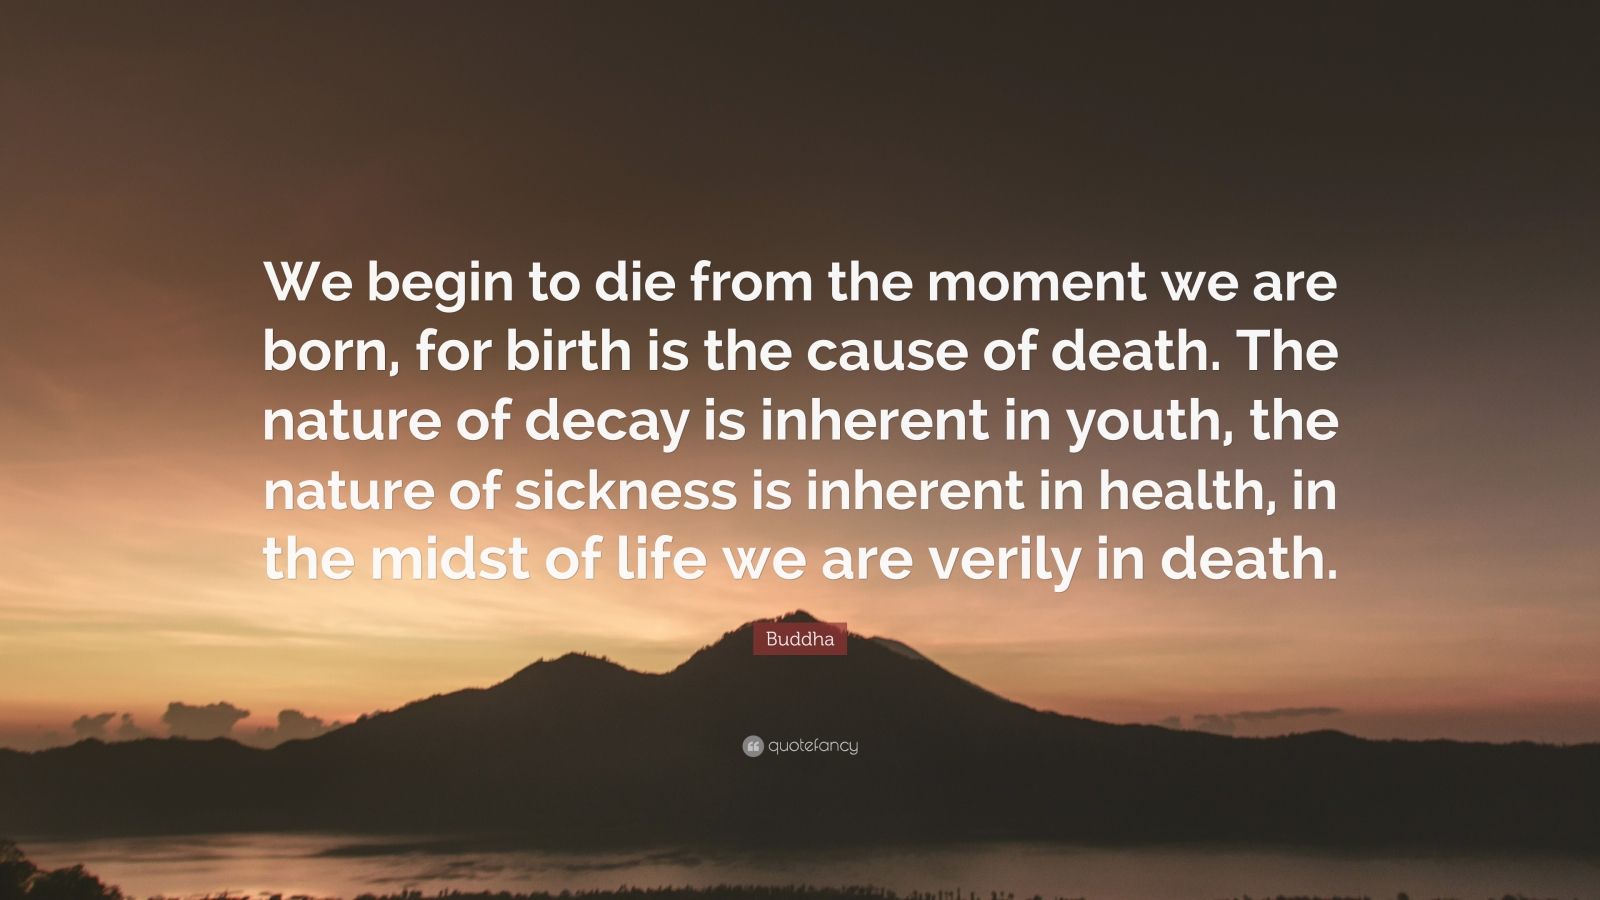 4269561 Buddha Quote We begin to die from the moment we are born for birth